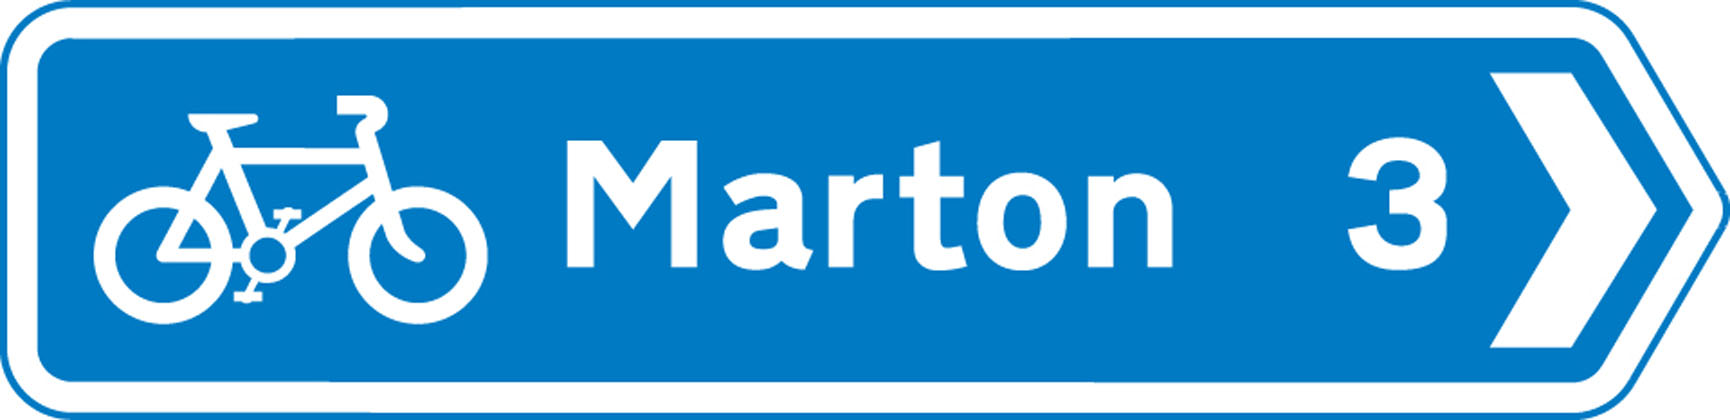 Traffic Sign - Recommended route for pedal cycles to place shown